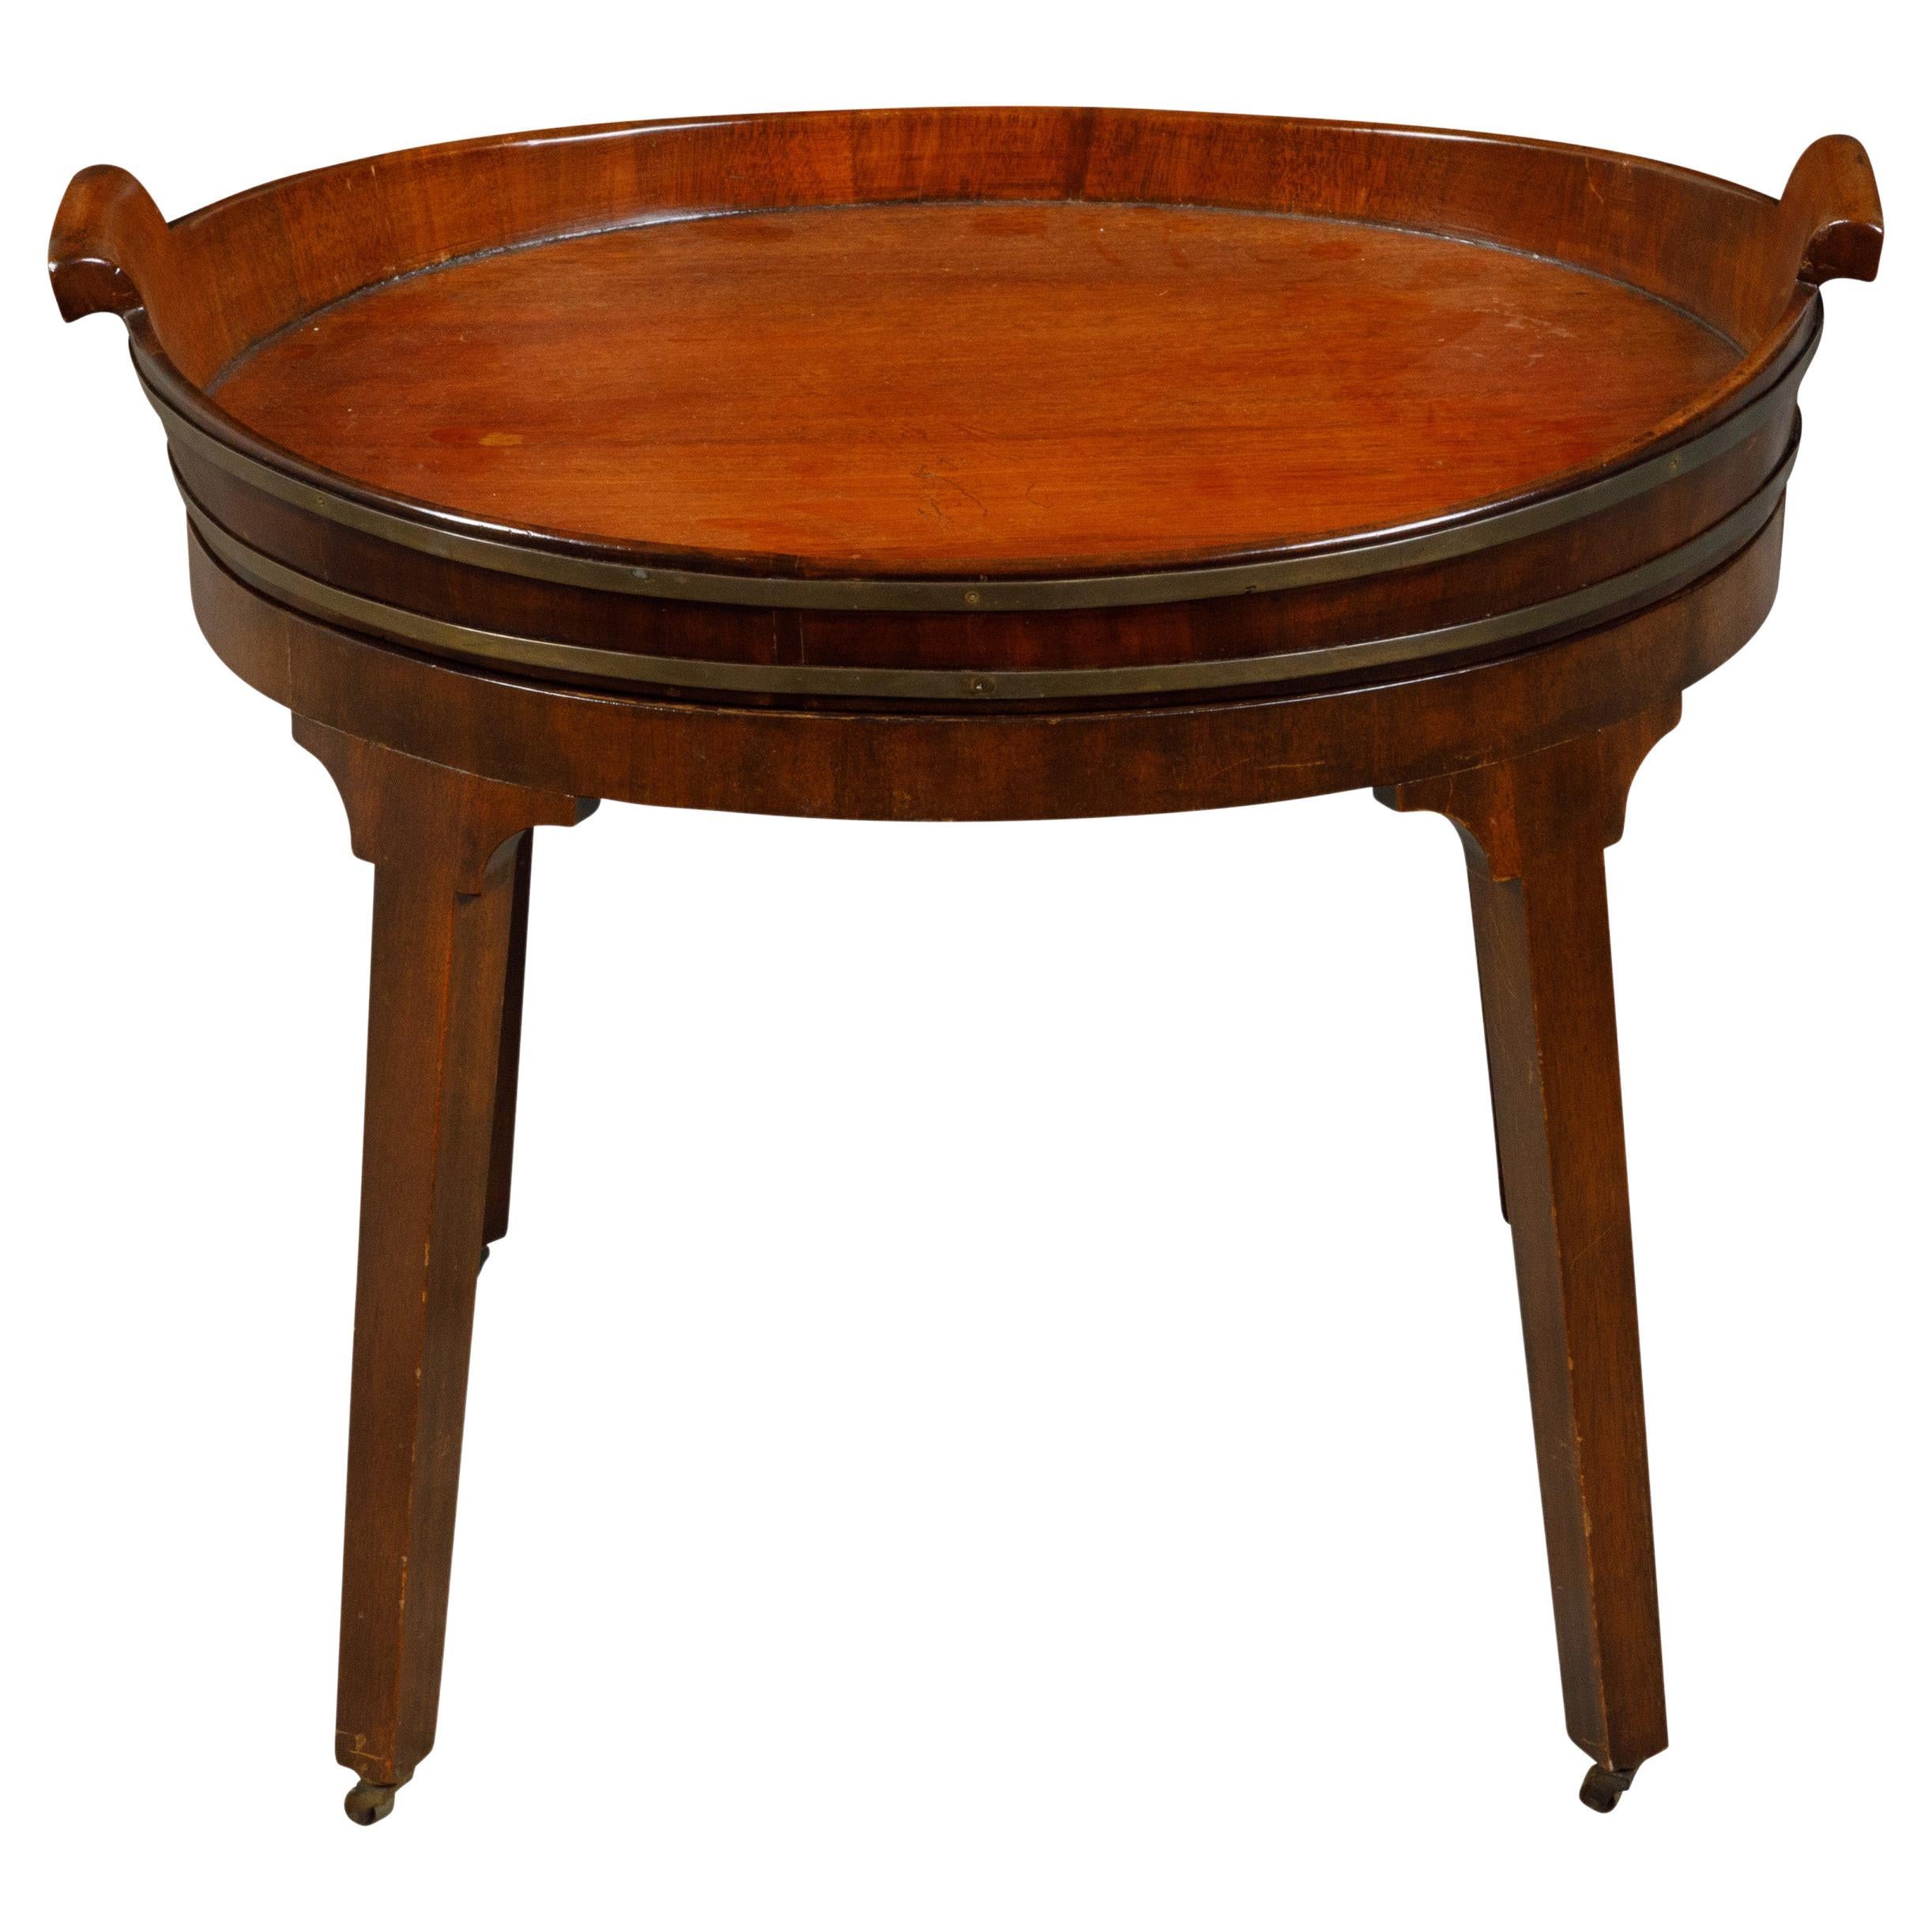 English 19th Century Oval Mahogany Tray Top Table with Brass Accents and Casters For Sale